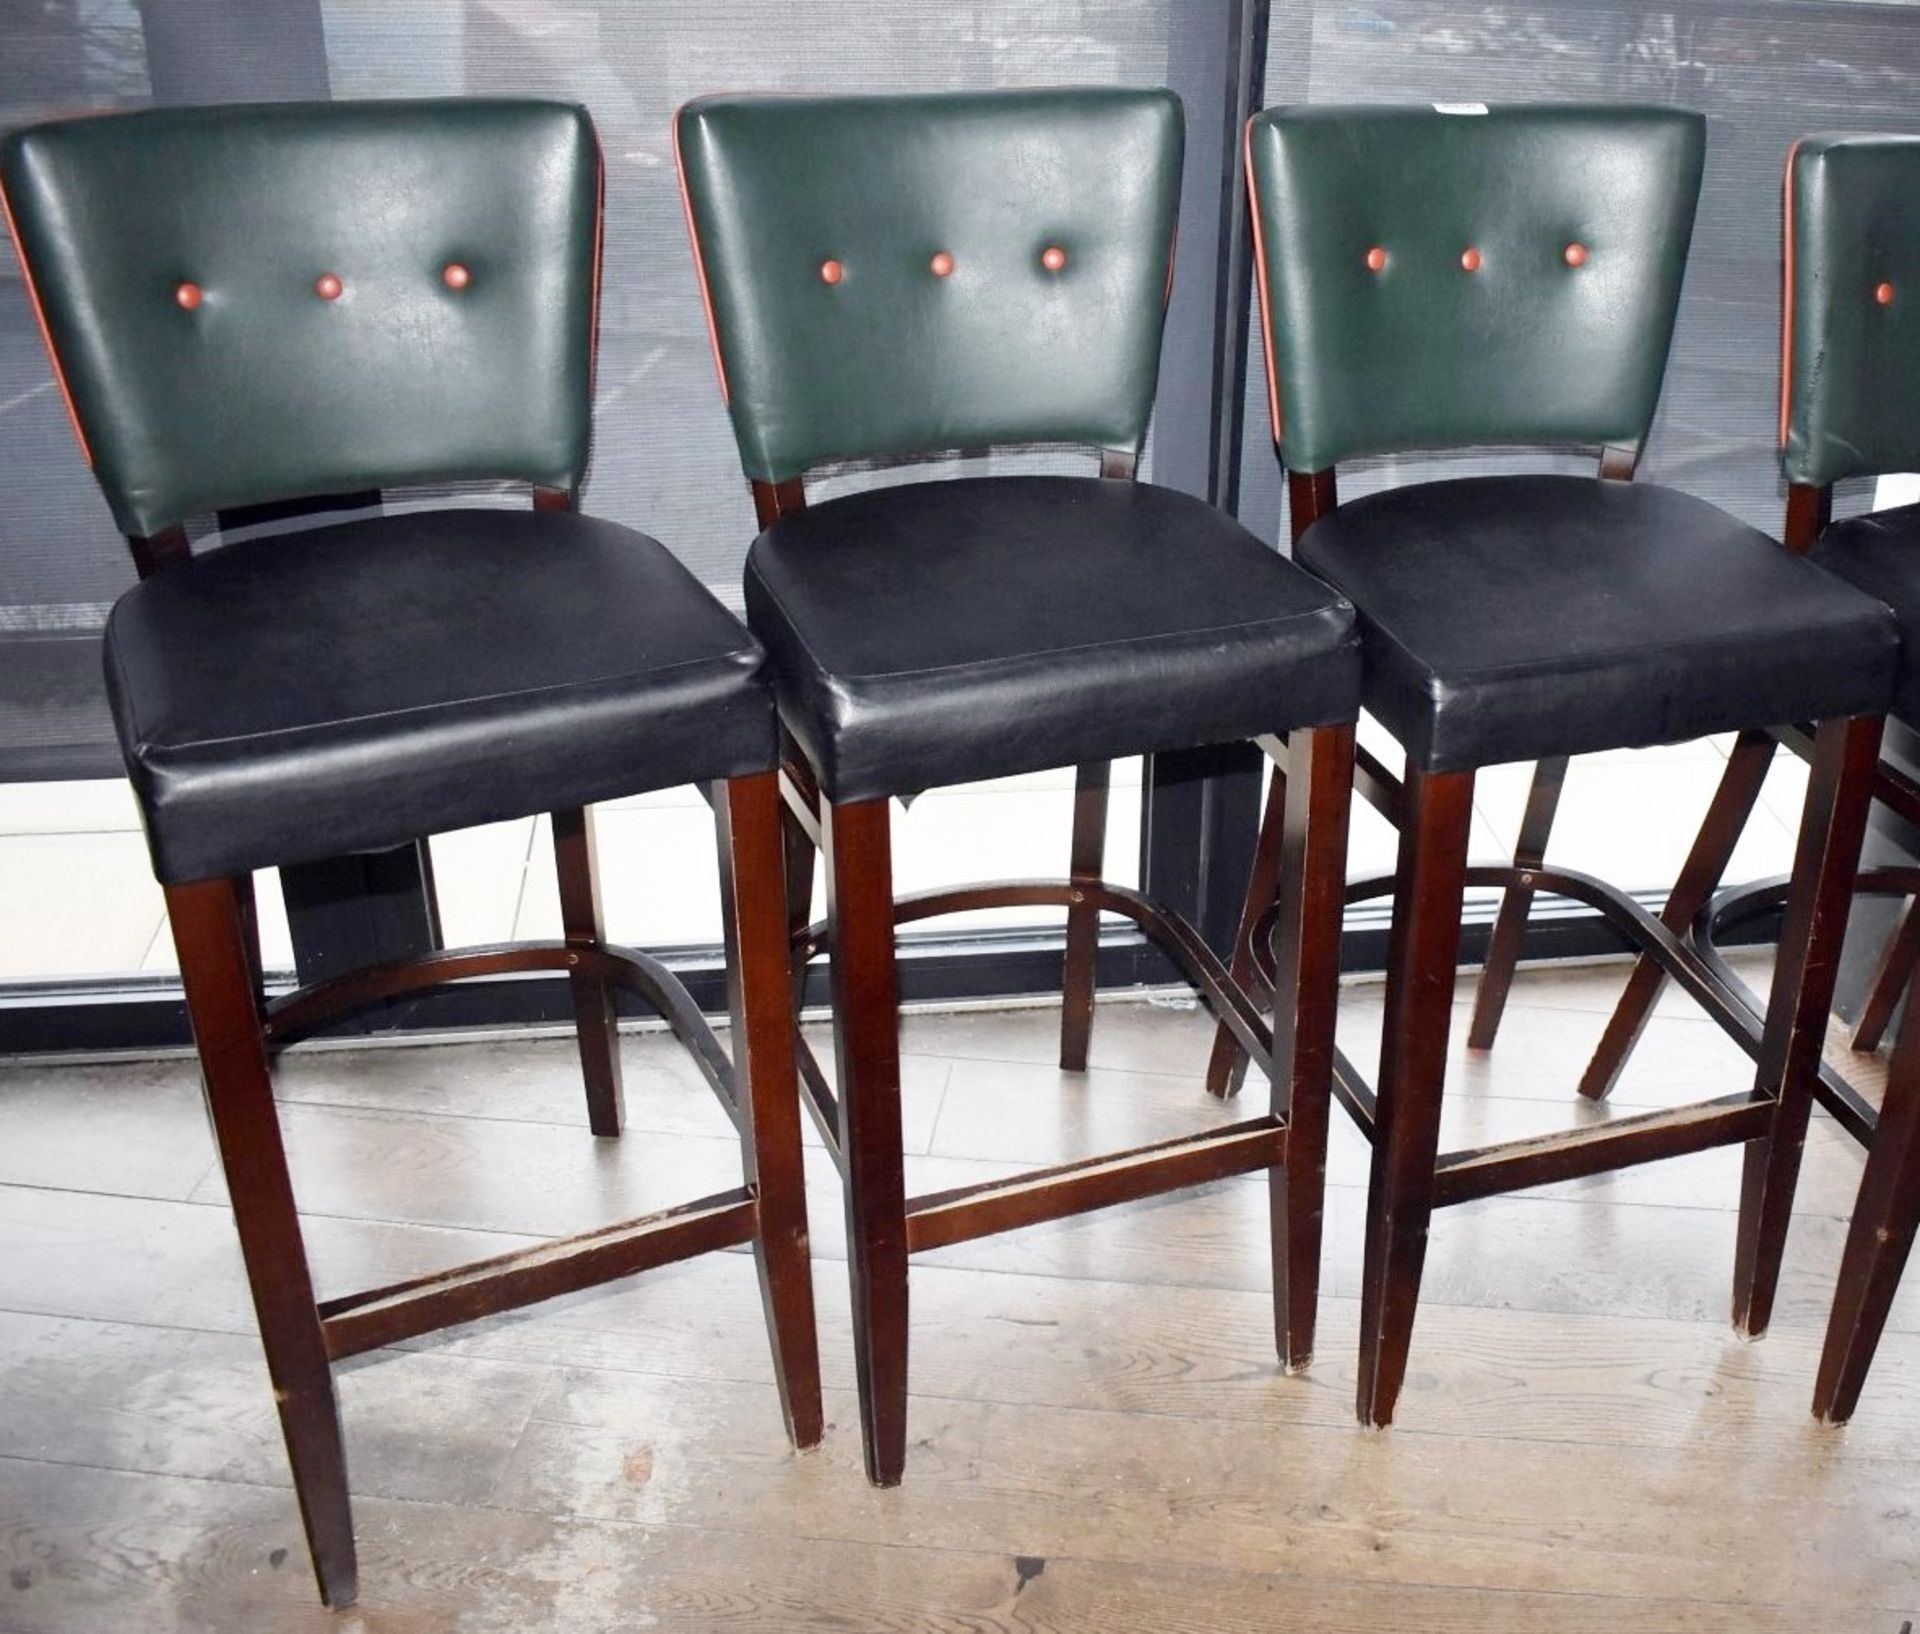 3 x Contemporary Button Back Restaurant Bar Stools - Upholstered in Green & Black Faux Leather - Image 3 of 4